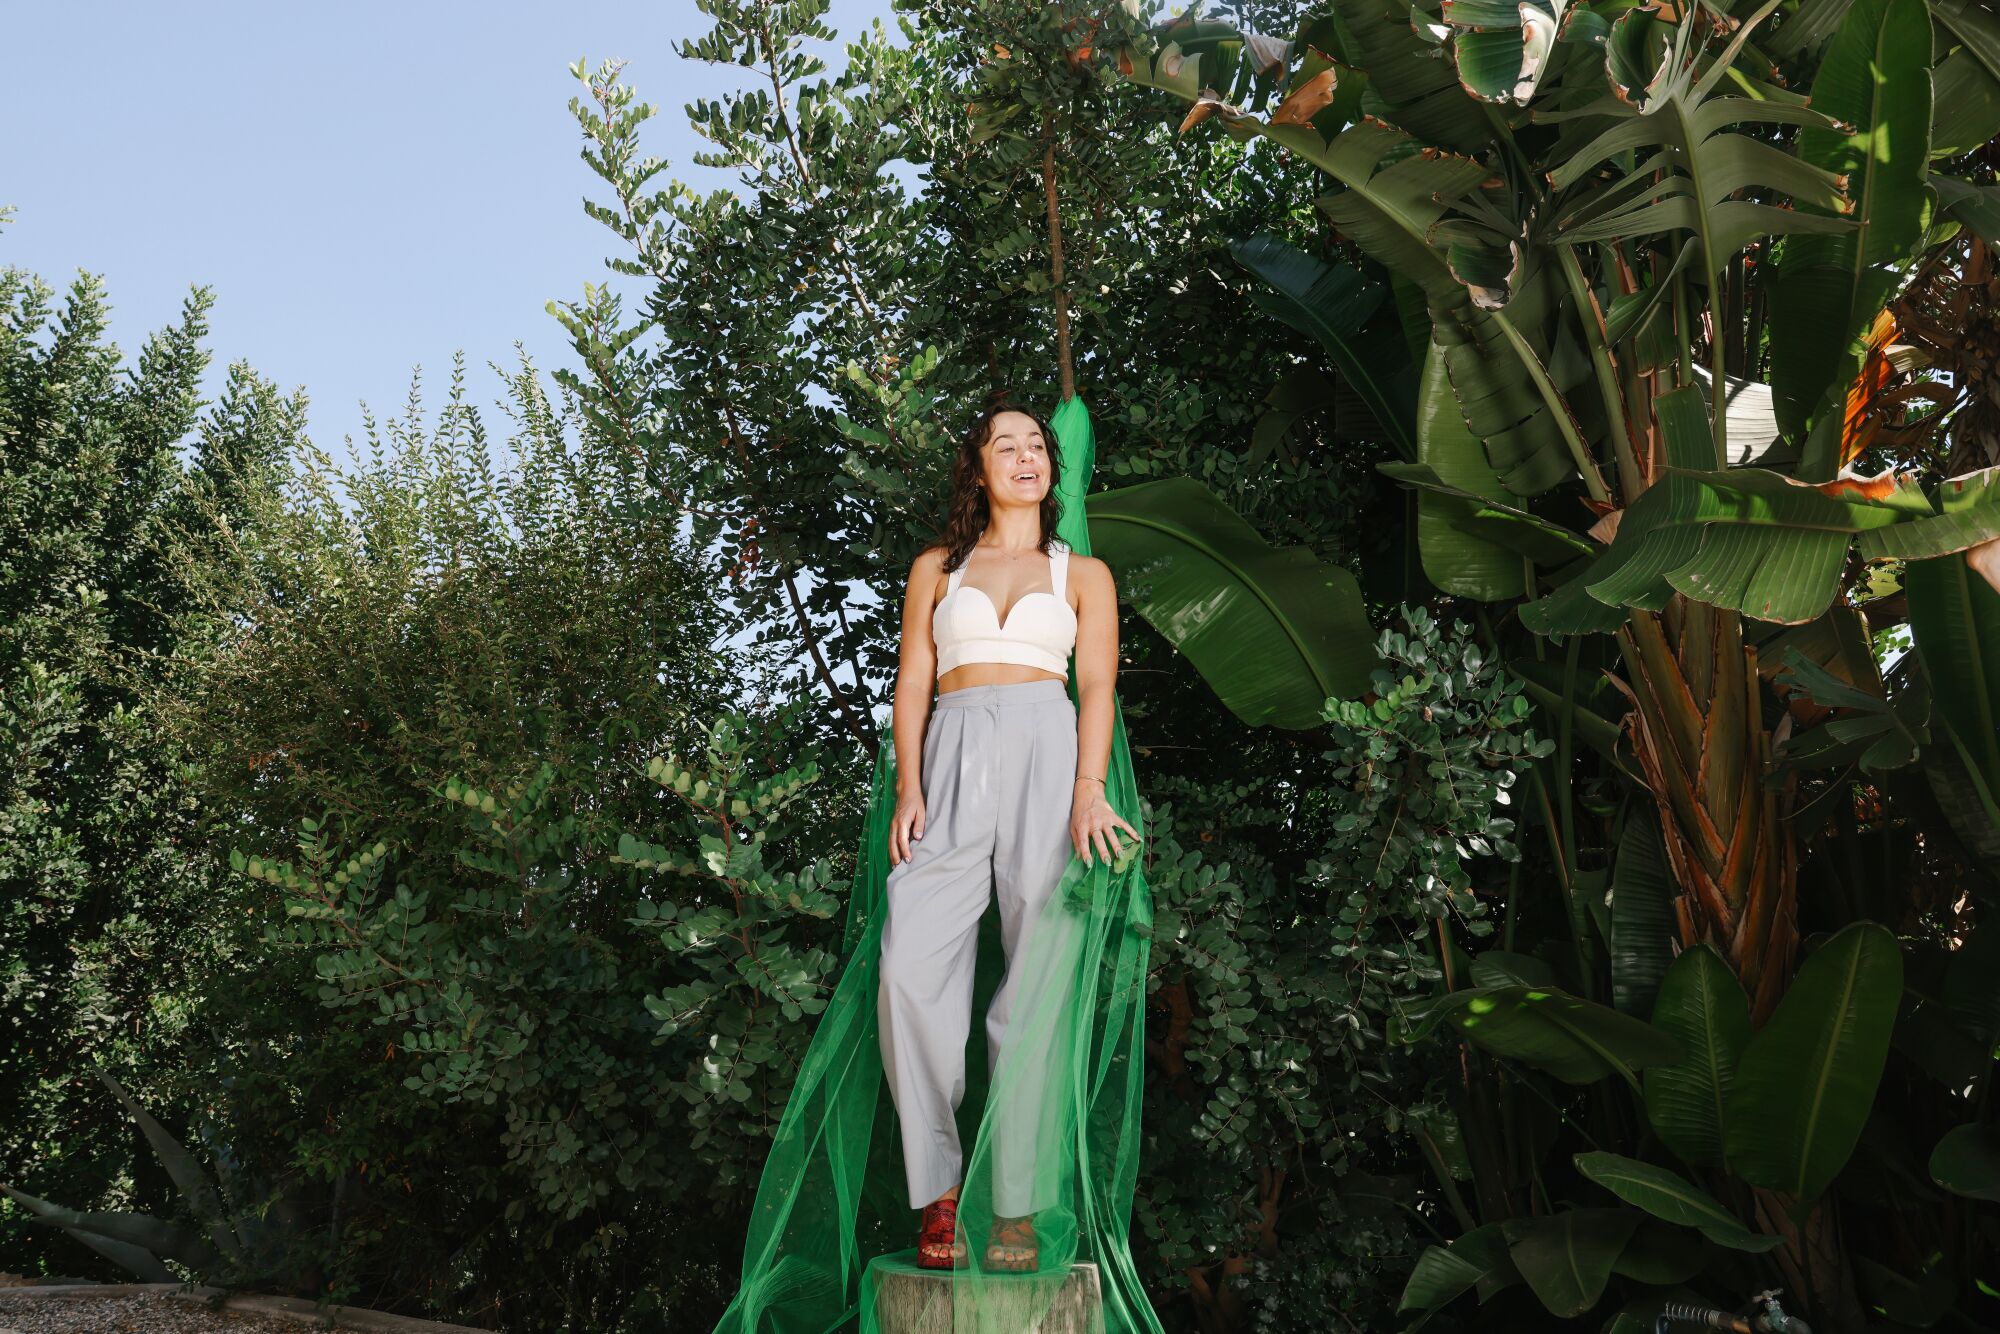 Alyssa Nader standing on a tree stump with plants and a green piece of tulle behind her.